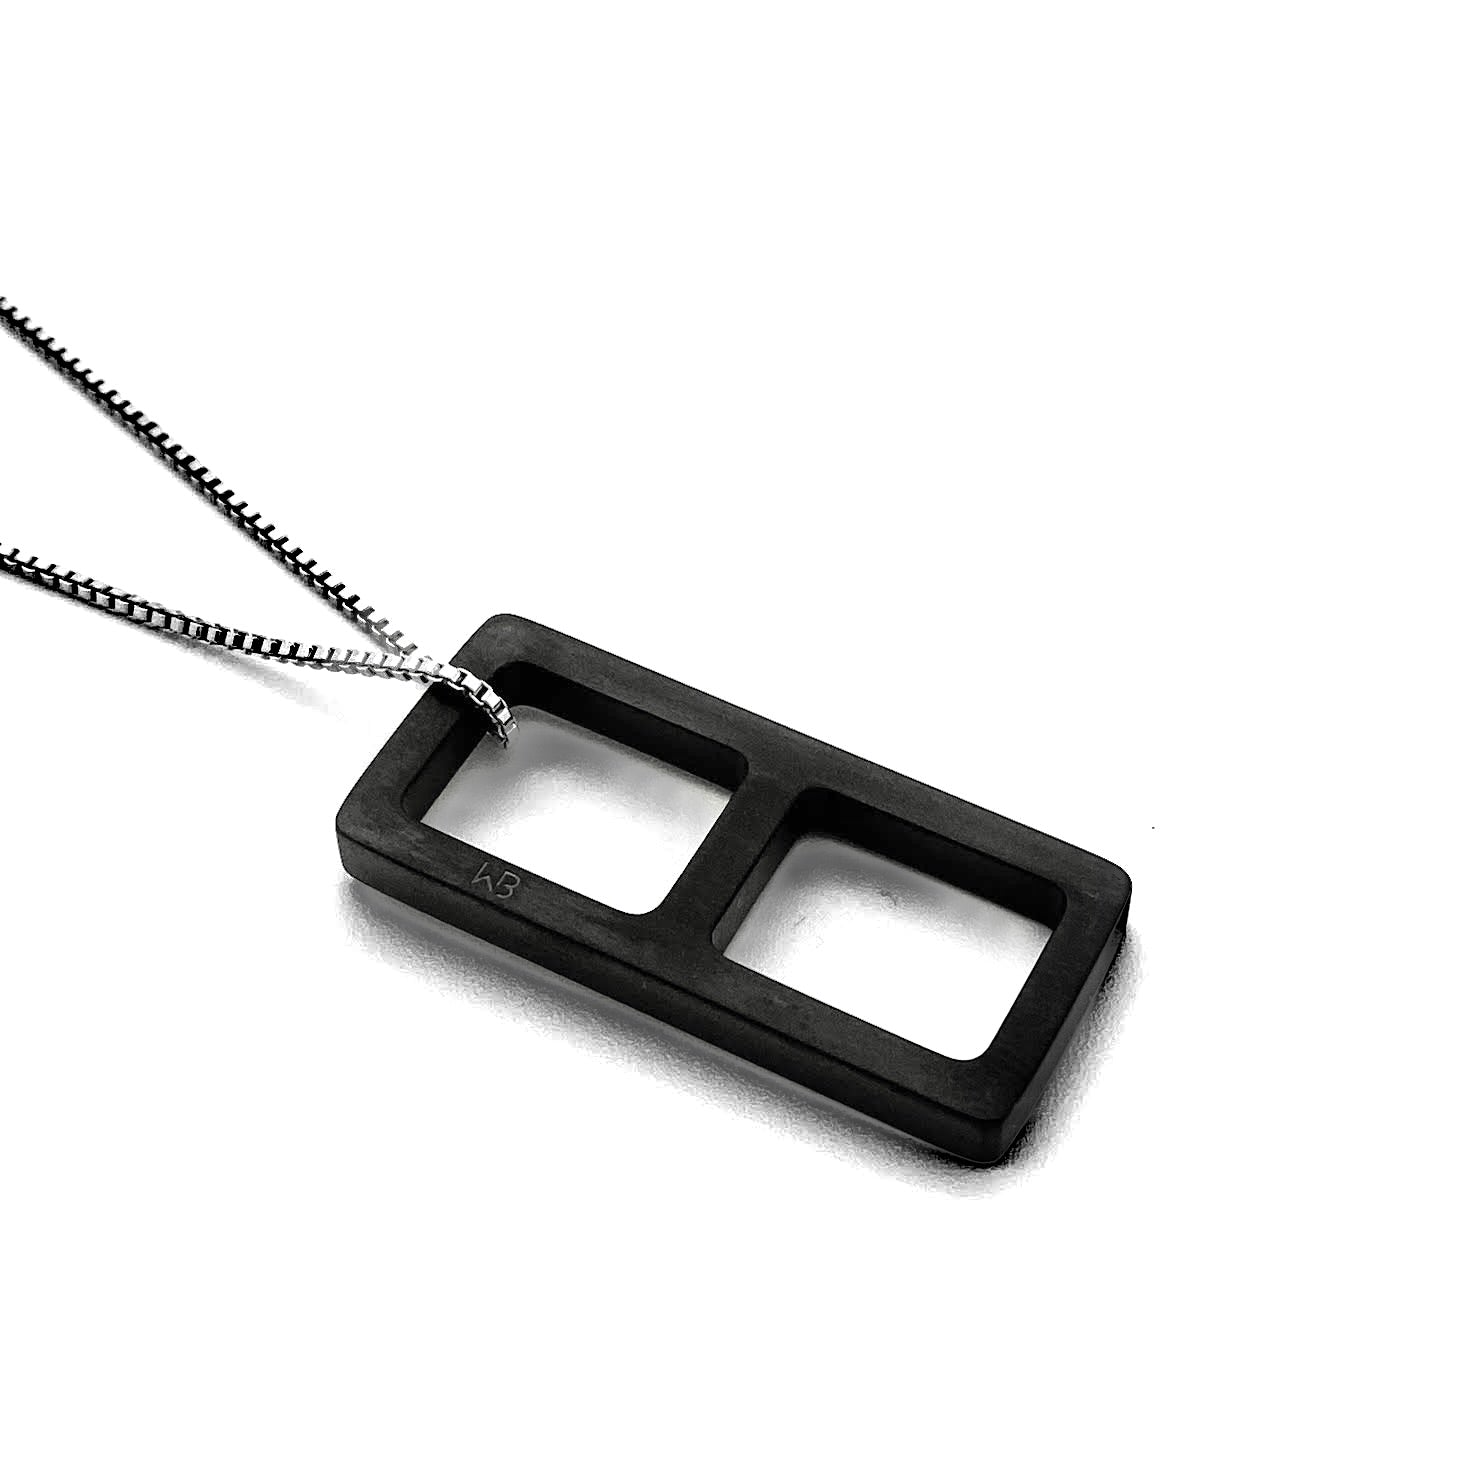 This meticulously designed with a geometrical flavor, this brushed black ceramic pendant necklace is perfect worn alone or paired with a WristBend stacking bracelet. Made by WristBend